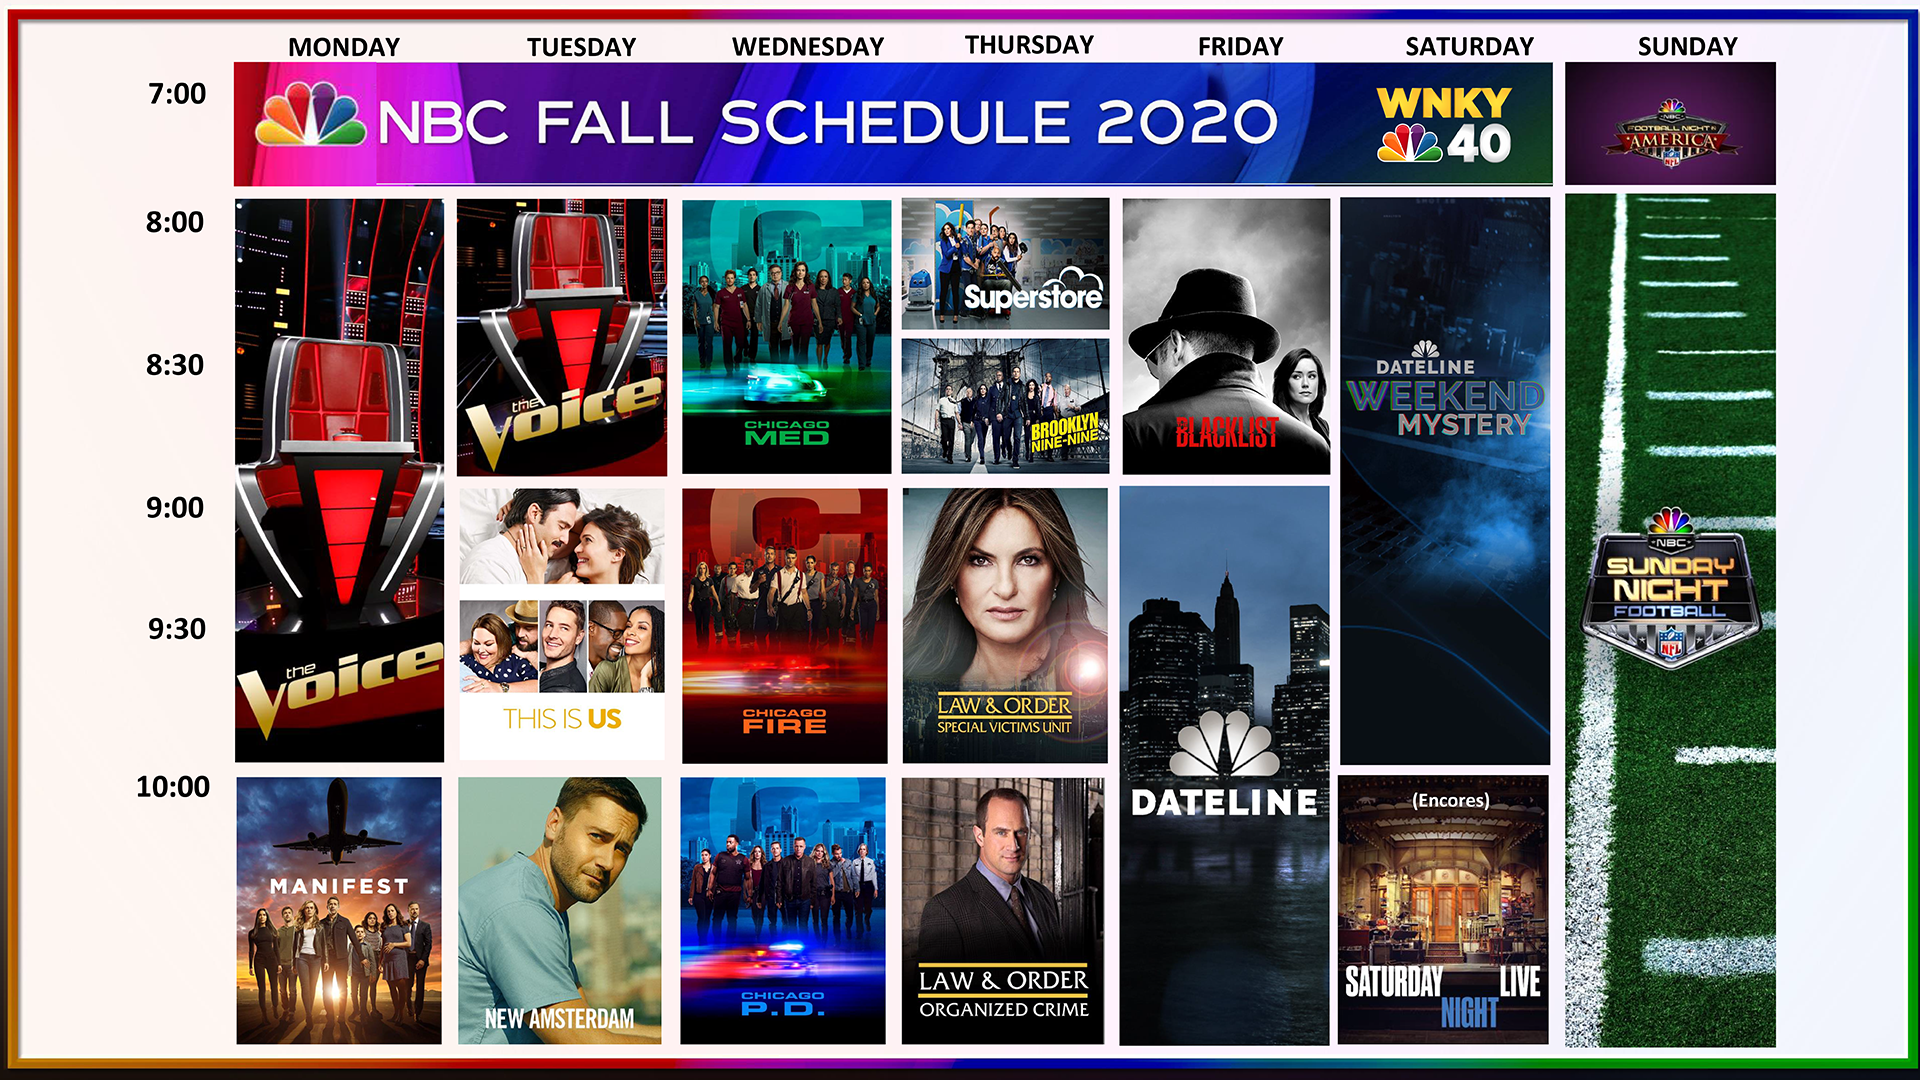 Nbc Fall 2022 Schedule Nbc Enters The 2020-21 Season With Unprecedented Stability Across Its  Schedule - News 40 | Wnky Television